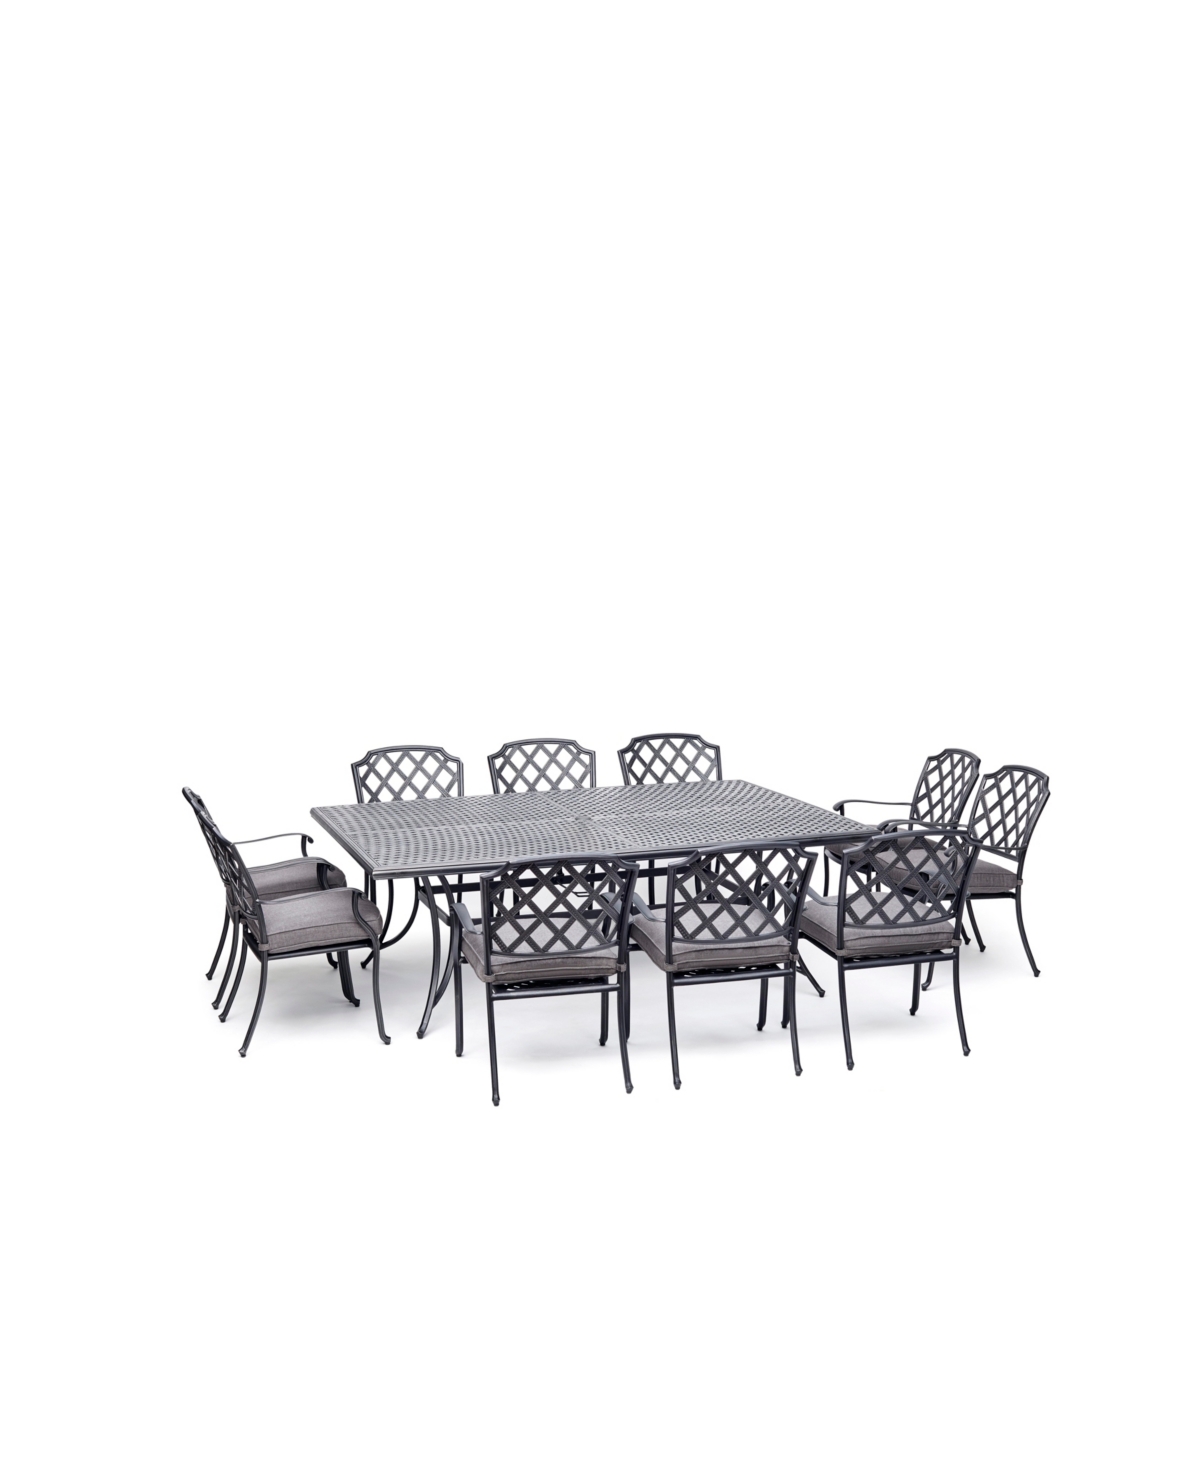 Vintage Ii Outdoor 11-Pc. Dining Set (84 X 60 Table & 10 Dining Chairs) With Outdura Cushions, Created for Macys